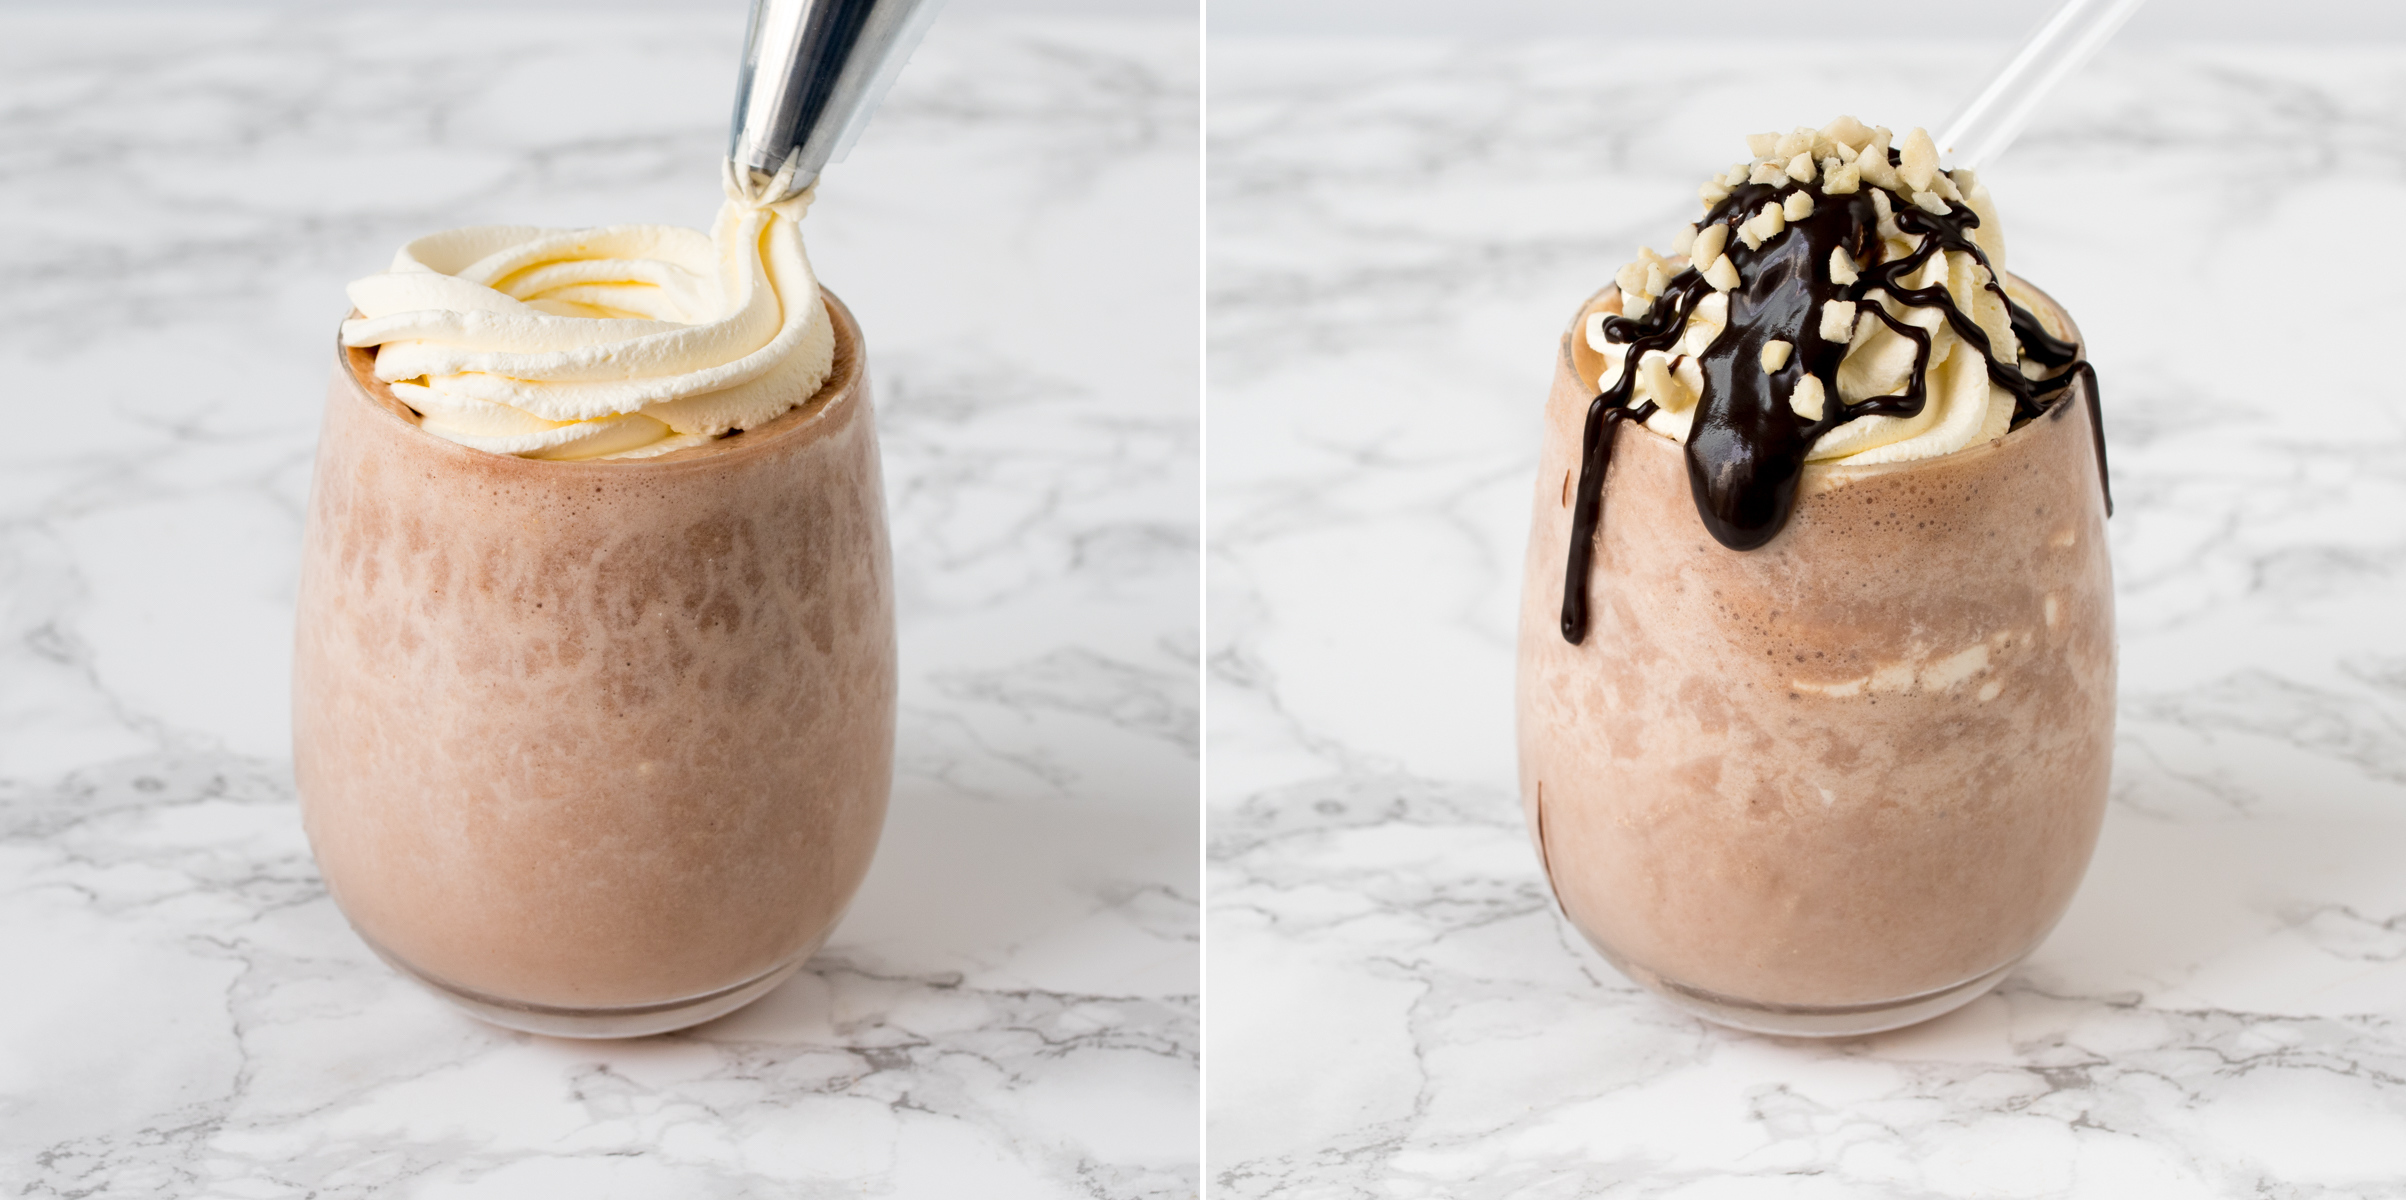 5 minute chocolate peanut butter smoothie step4 collage